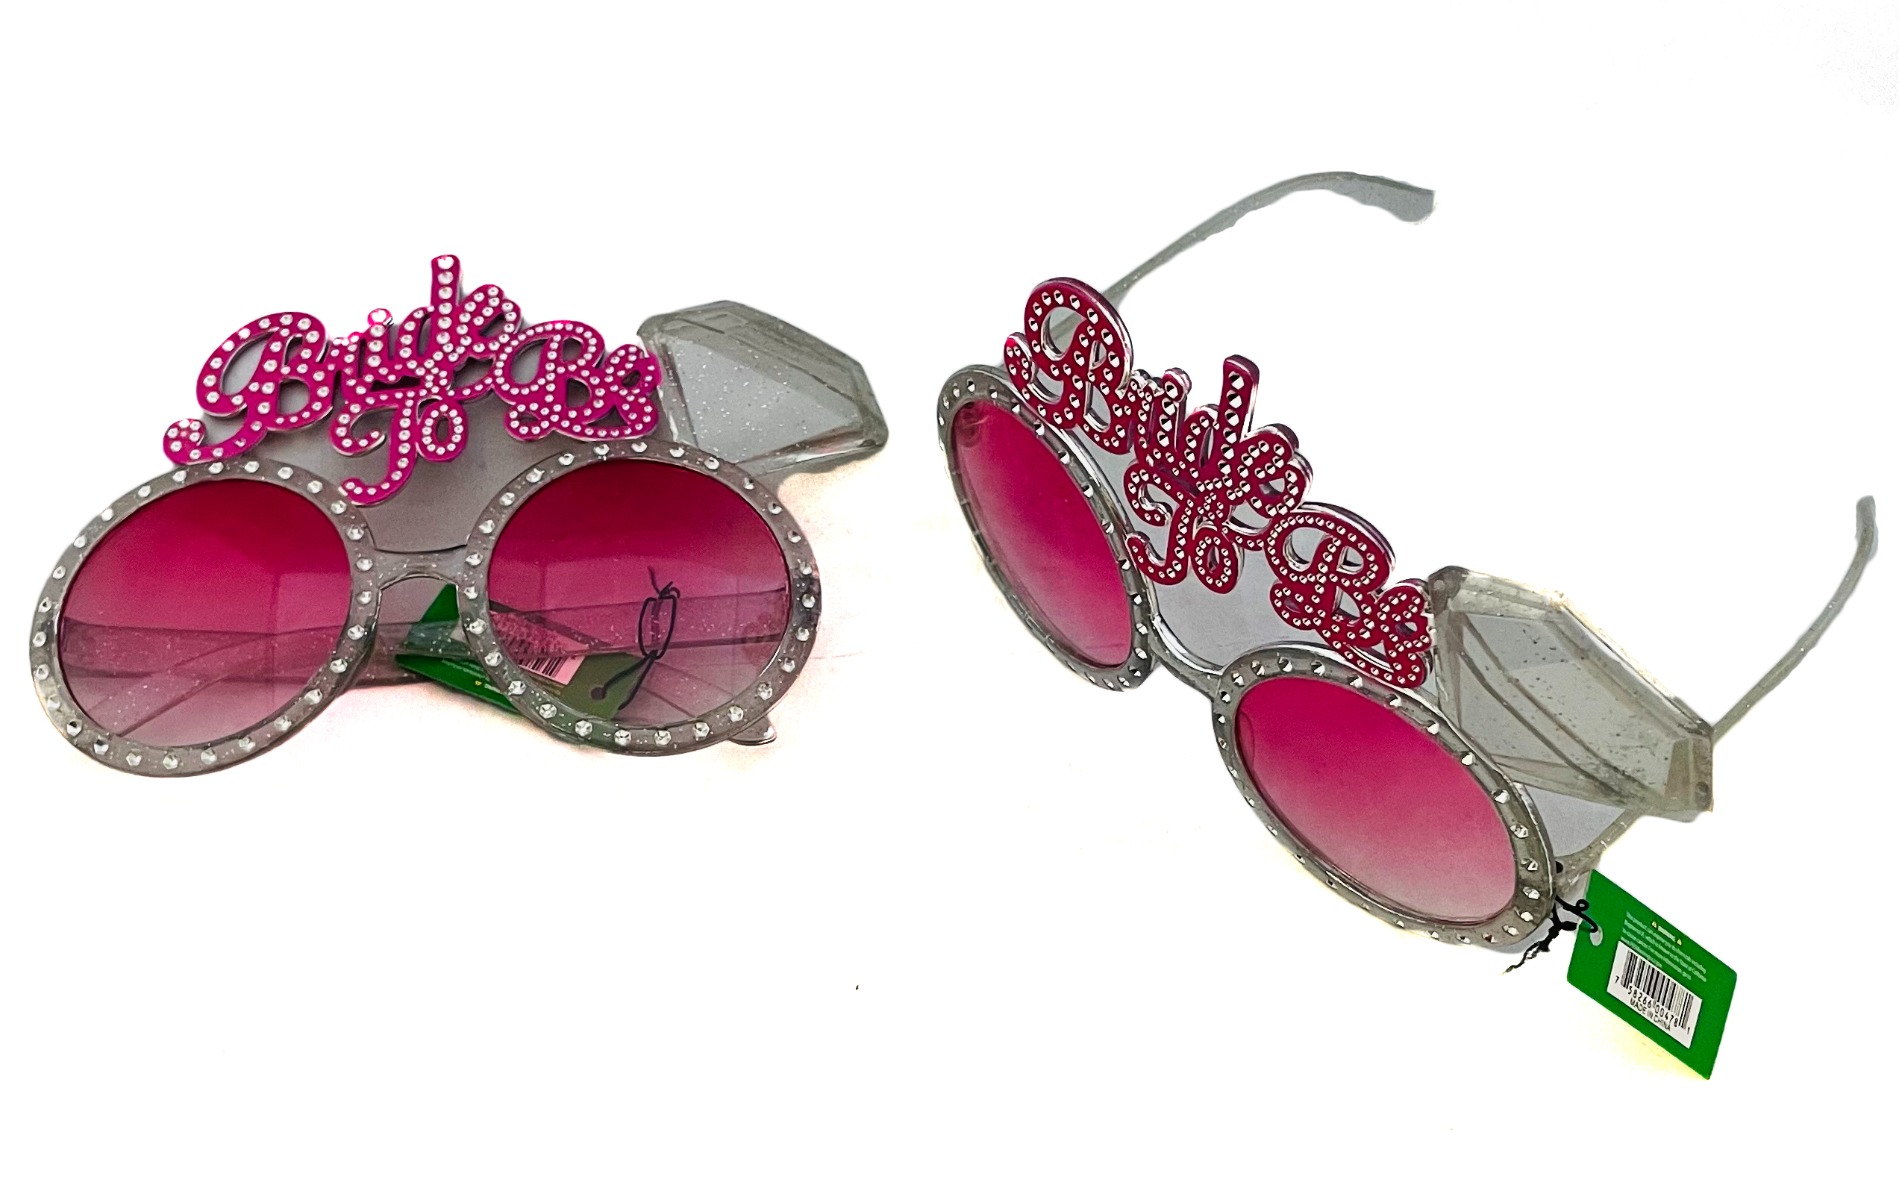 Bachelorette Bride To Be Party SUNGLASSES w/ Embroidered RHINESTONEs